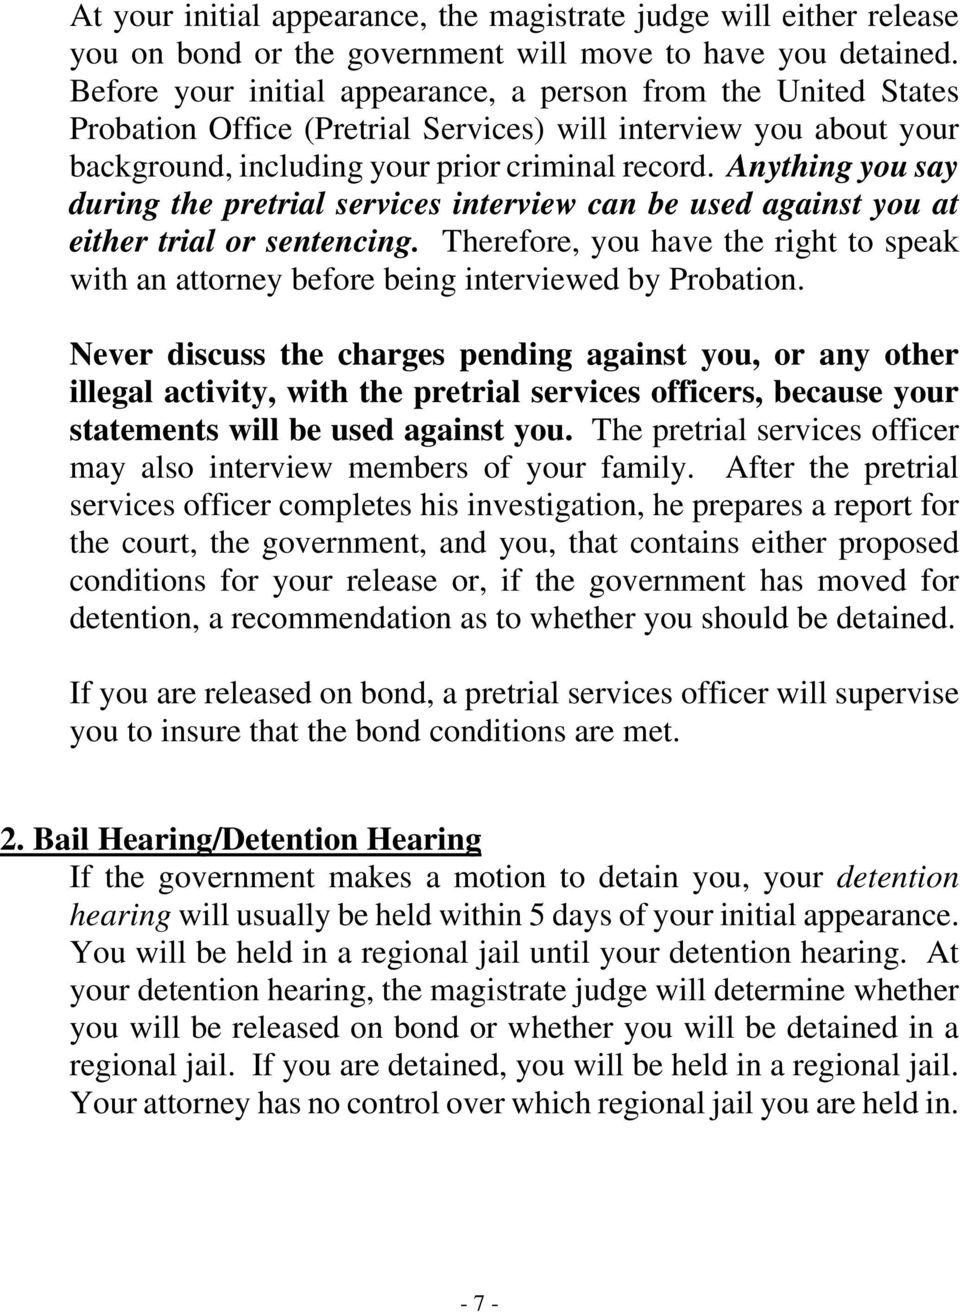 Anything you say during the pretrial services interview can be used against you at either trial or sentencing.